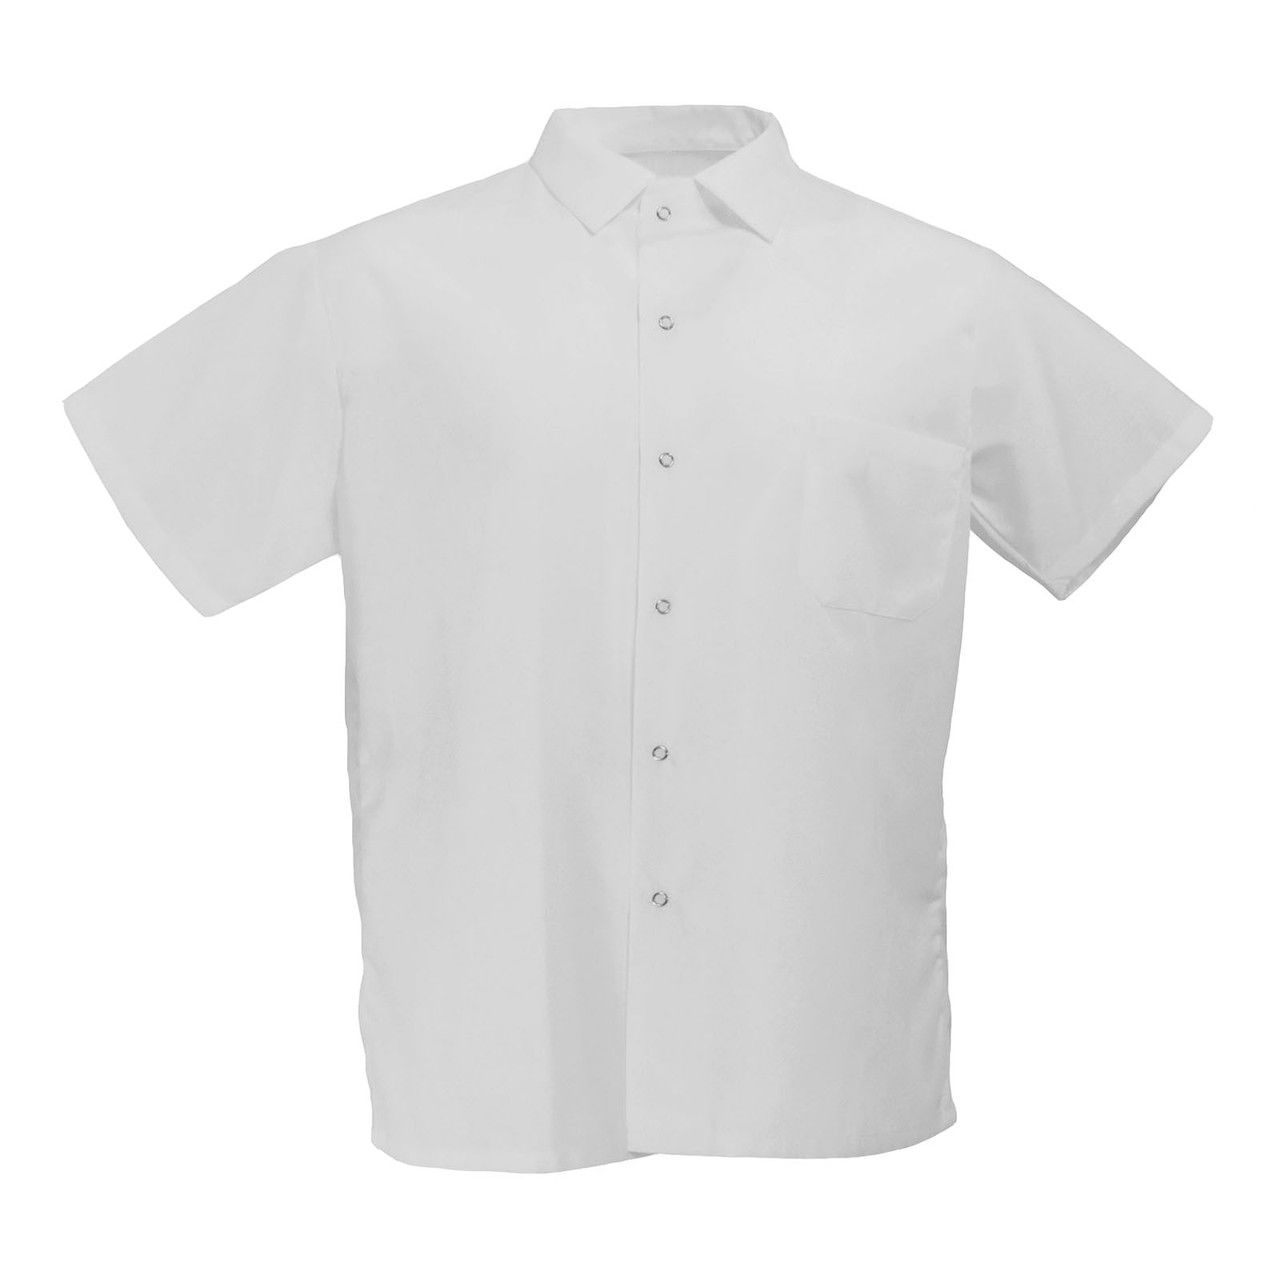 What is the fabric composition of Chef Trend S102 chef white shirts?